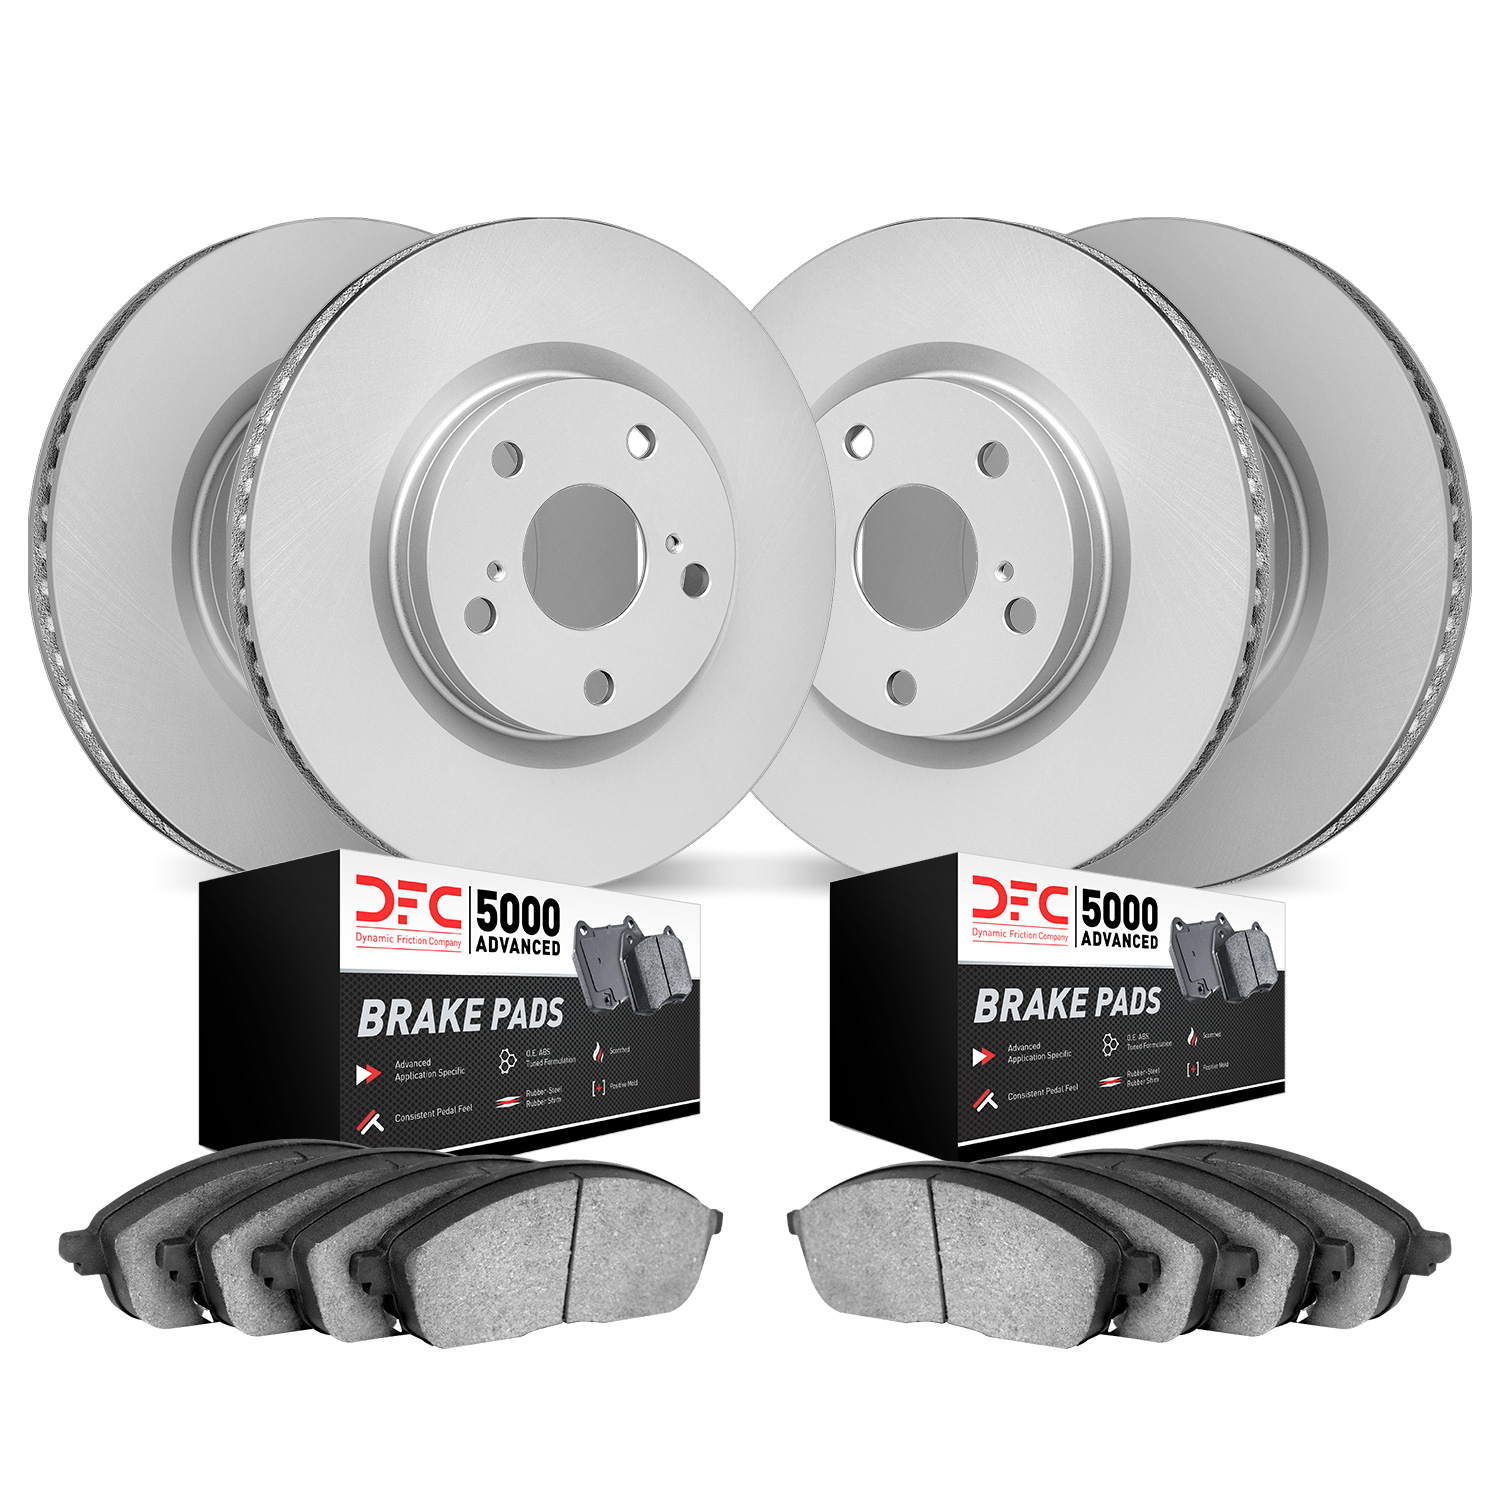 4504-55007 Geospec Brake Rotors w/5000 Advanced Brake Pads Kit, Fits Select Ford/Lincoln/Mercury/Mazda, Position: Front and Rear